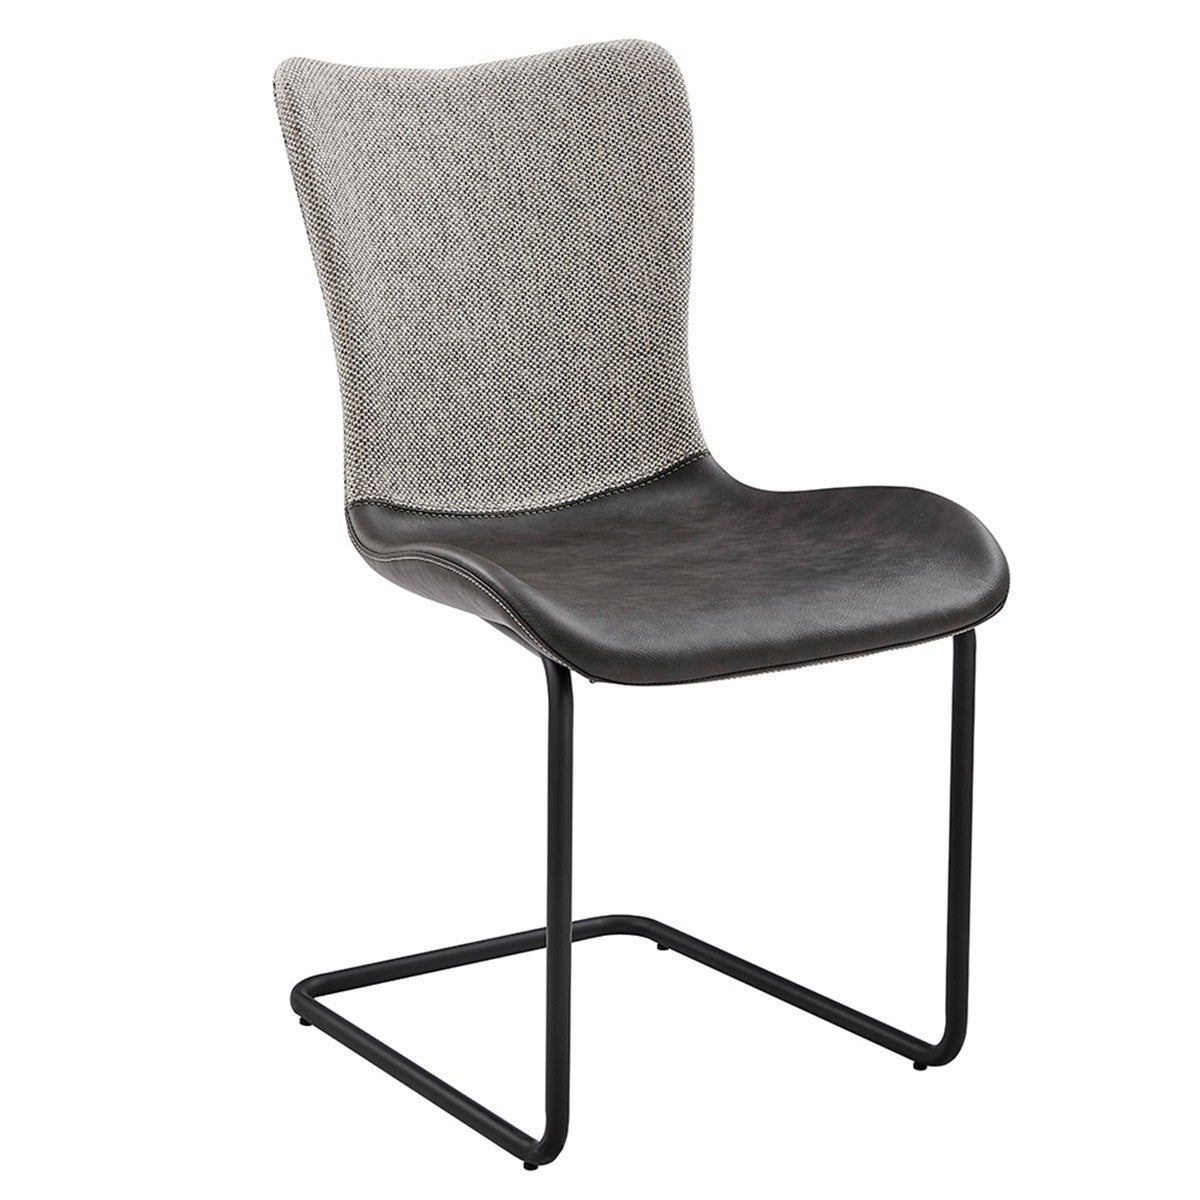 Set of Two Gray Metro Mix Cantilever Dining Chairs